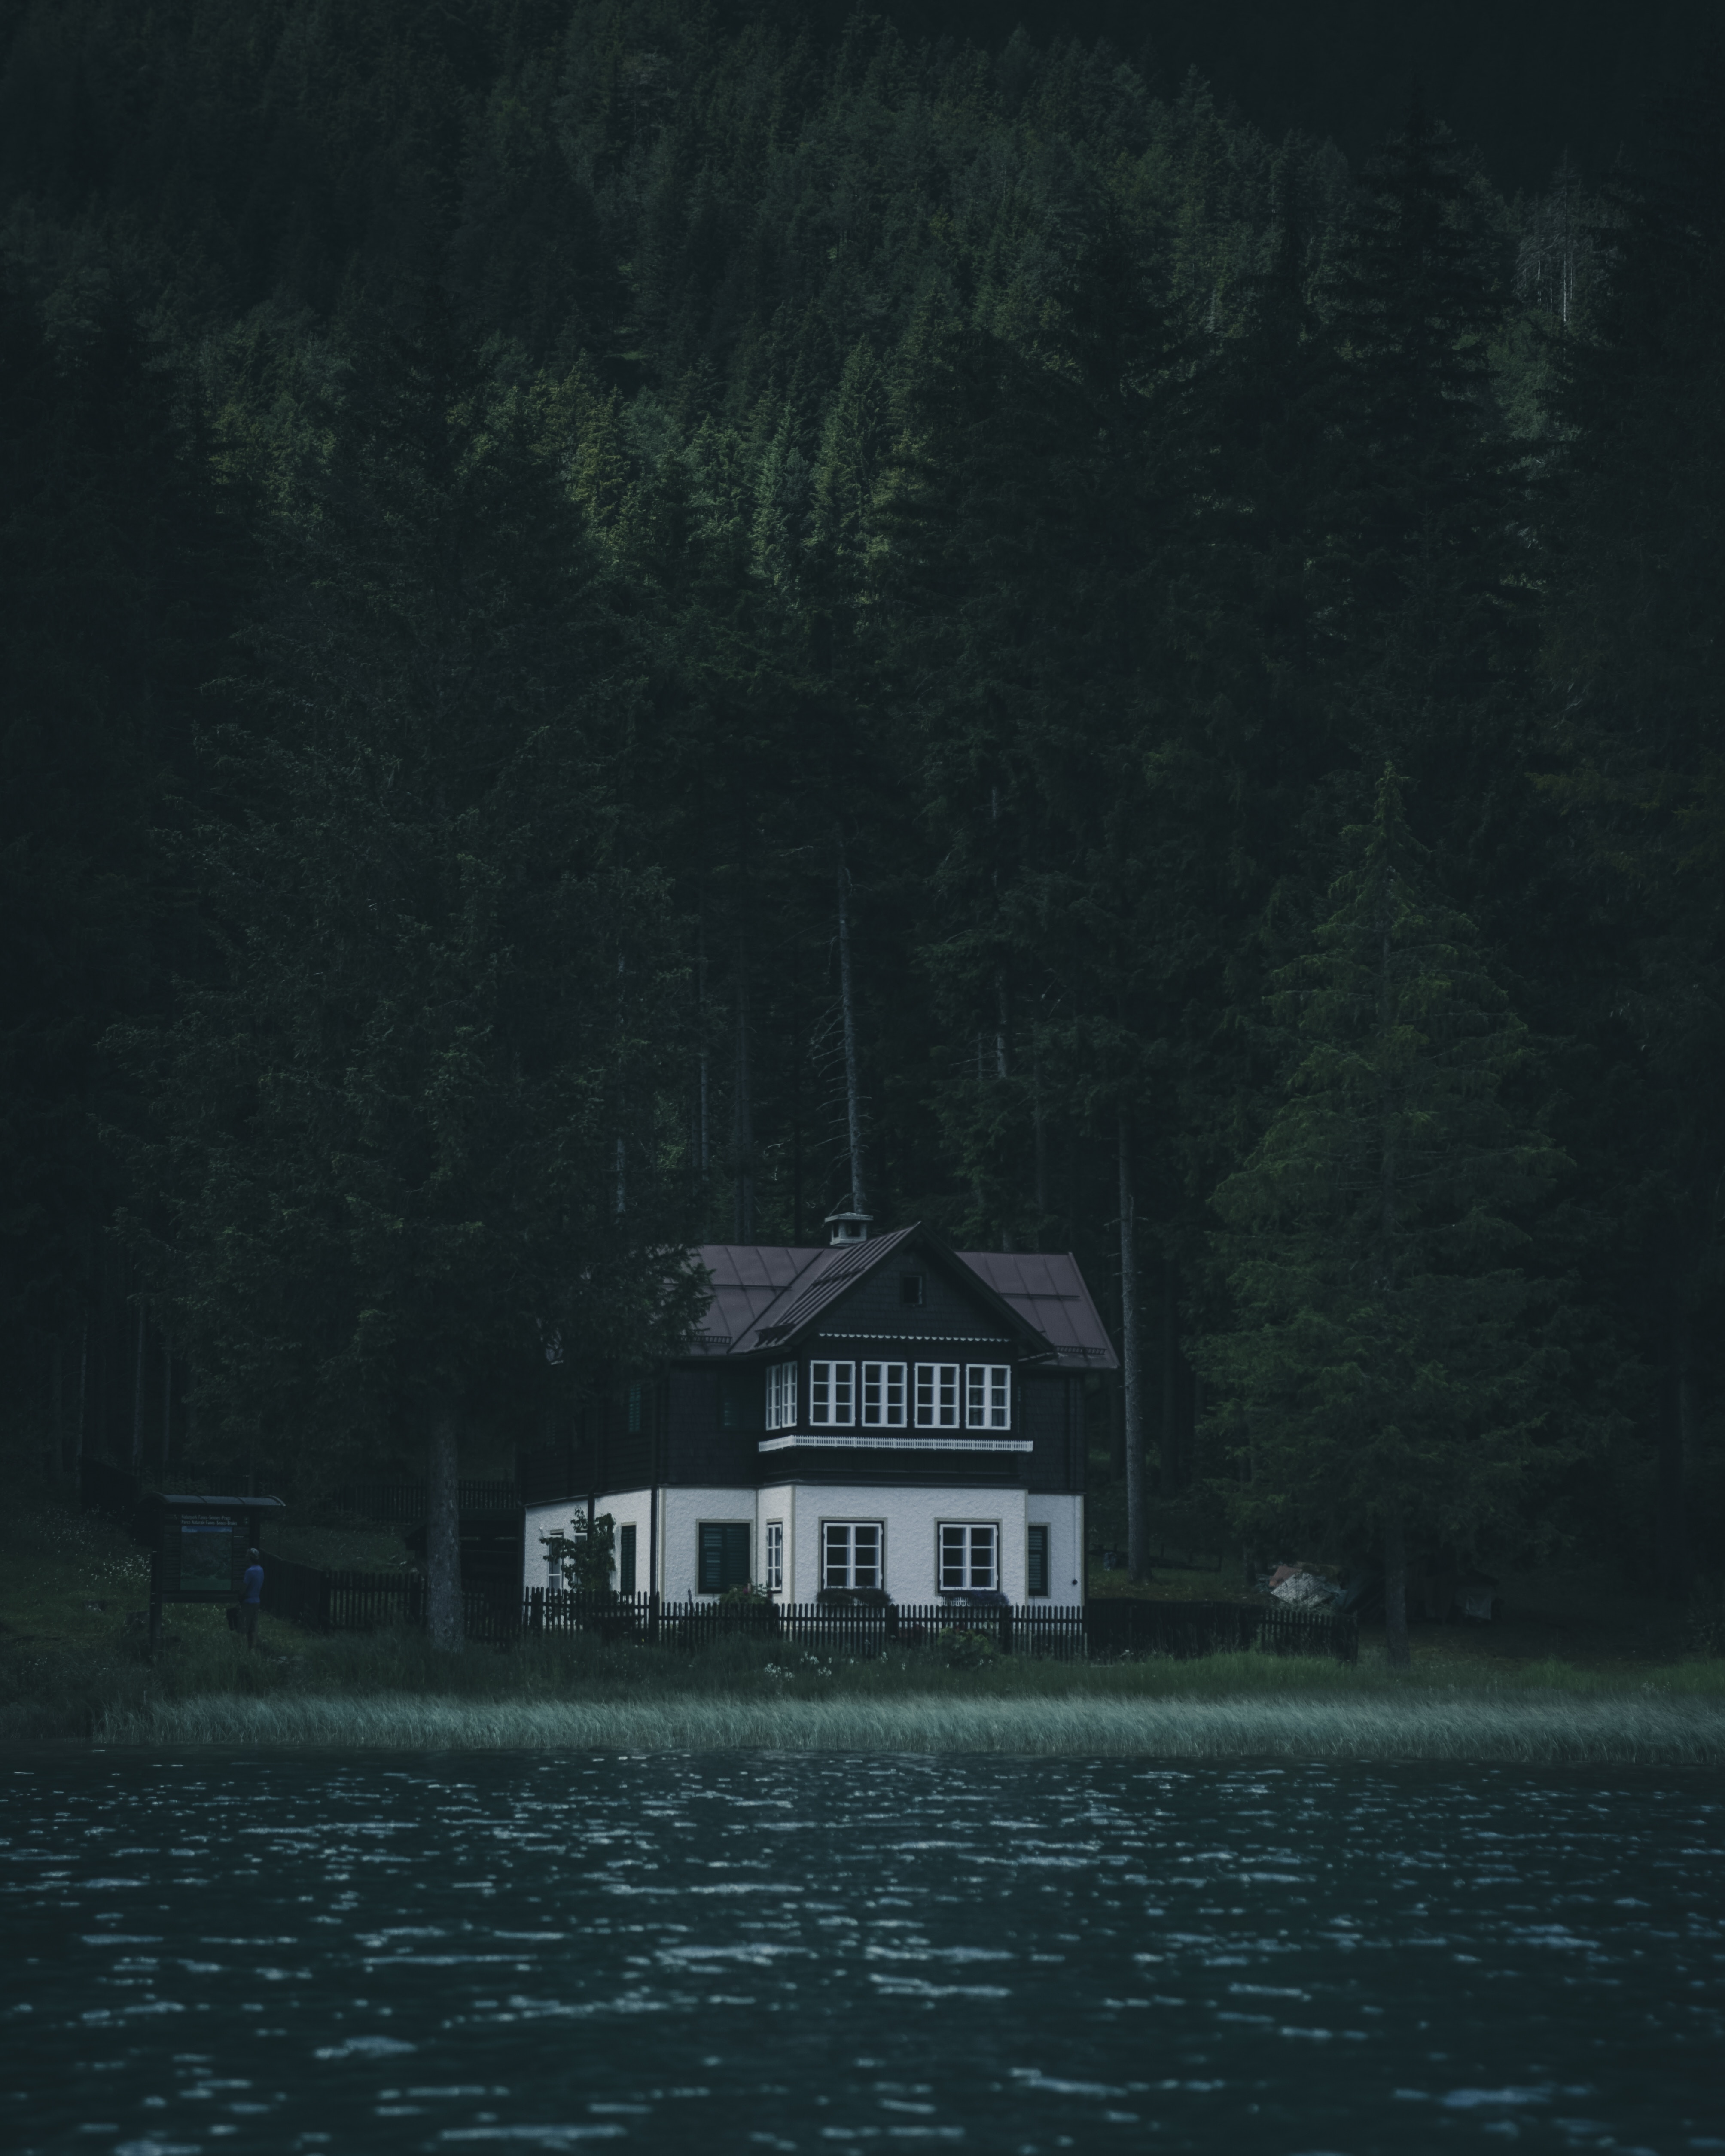 Free HD small house, nature, rivers, trees, privacy, seclusion, forest, lodge, silence, gloomy